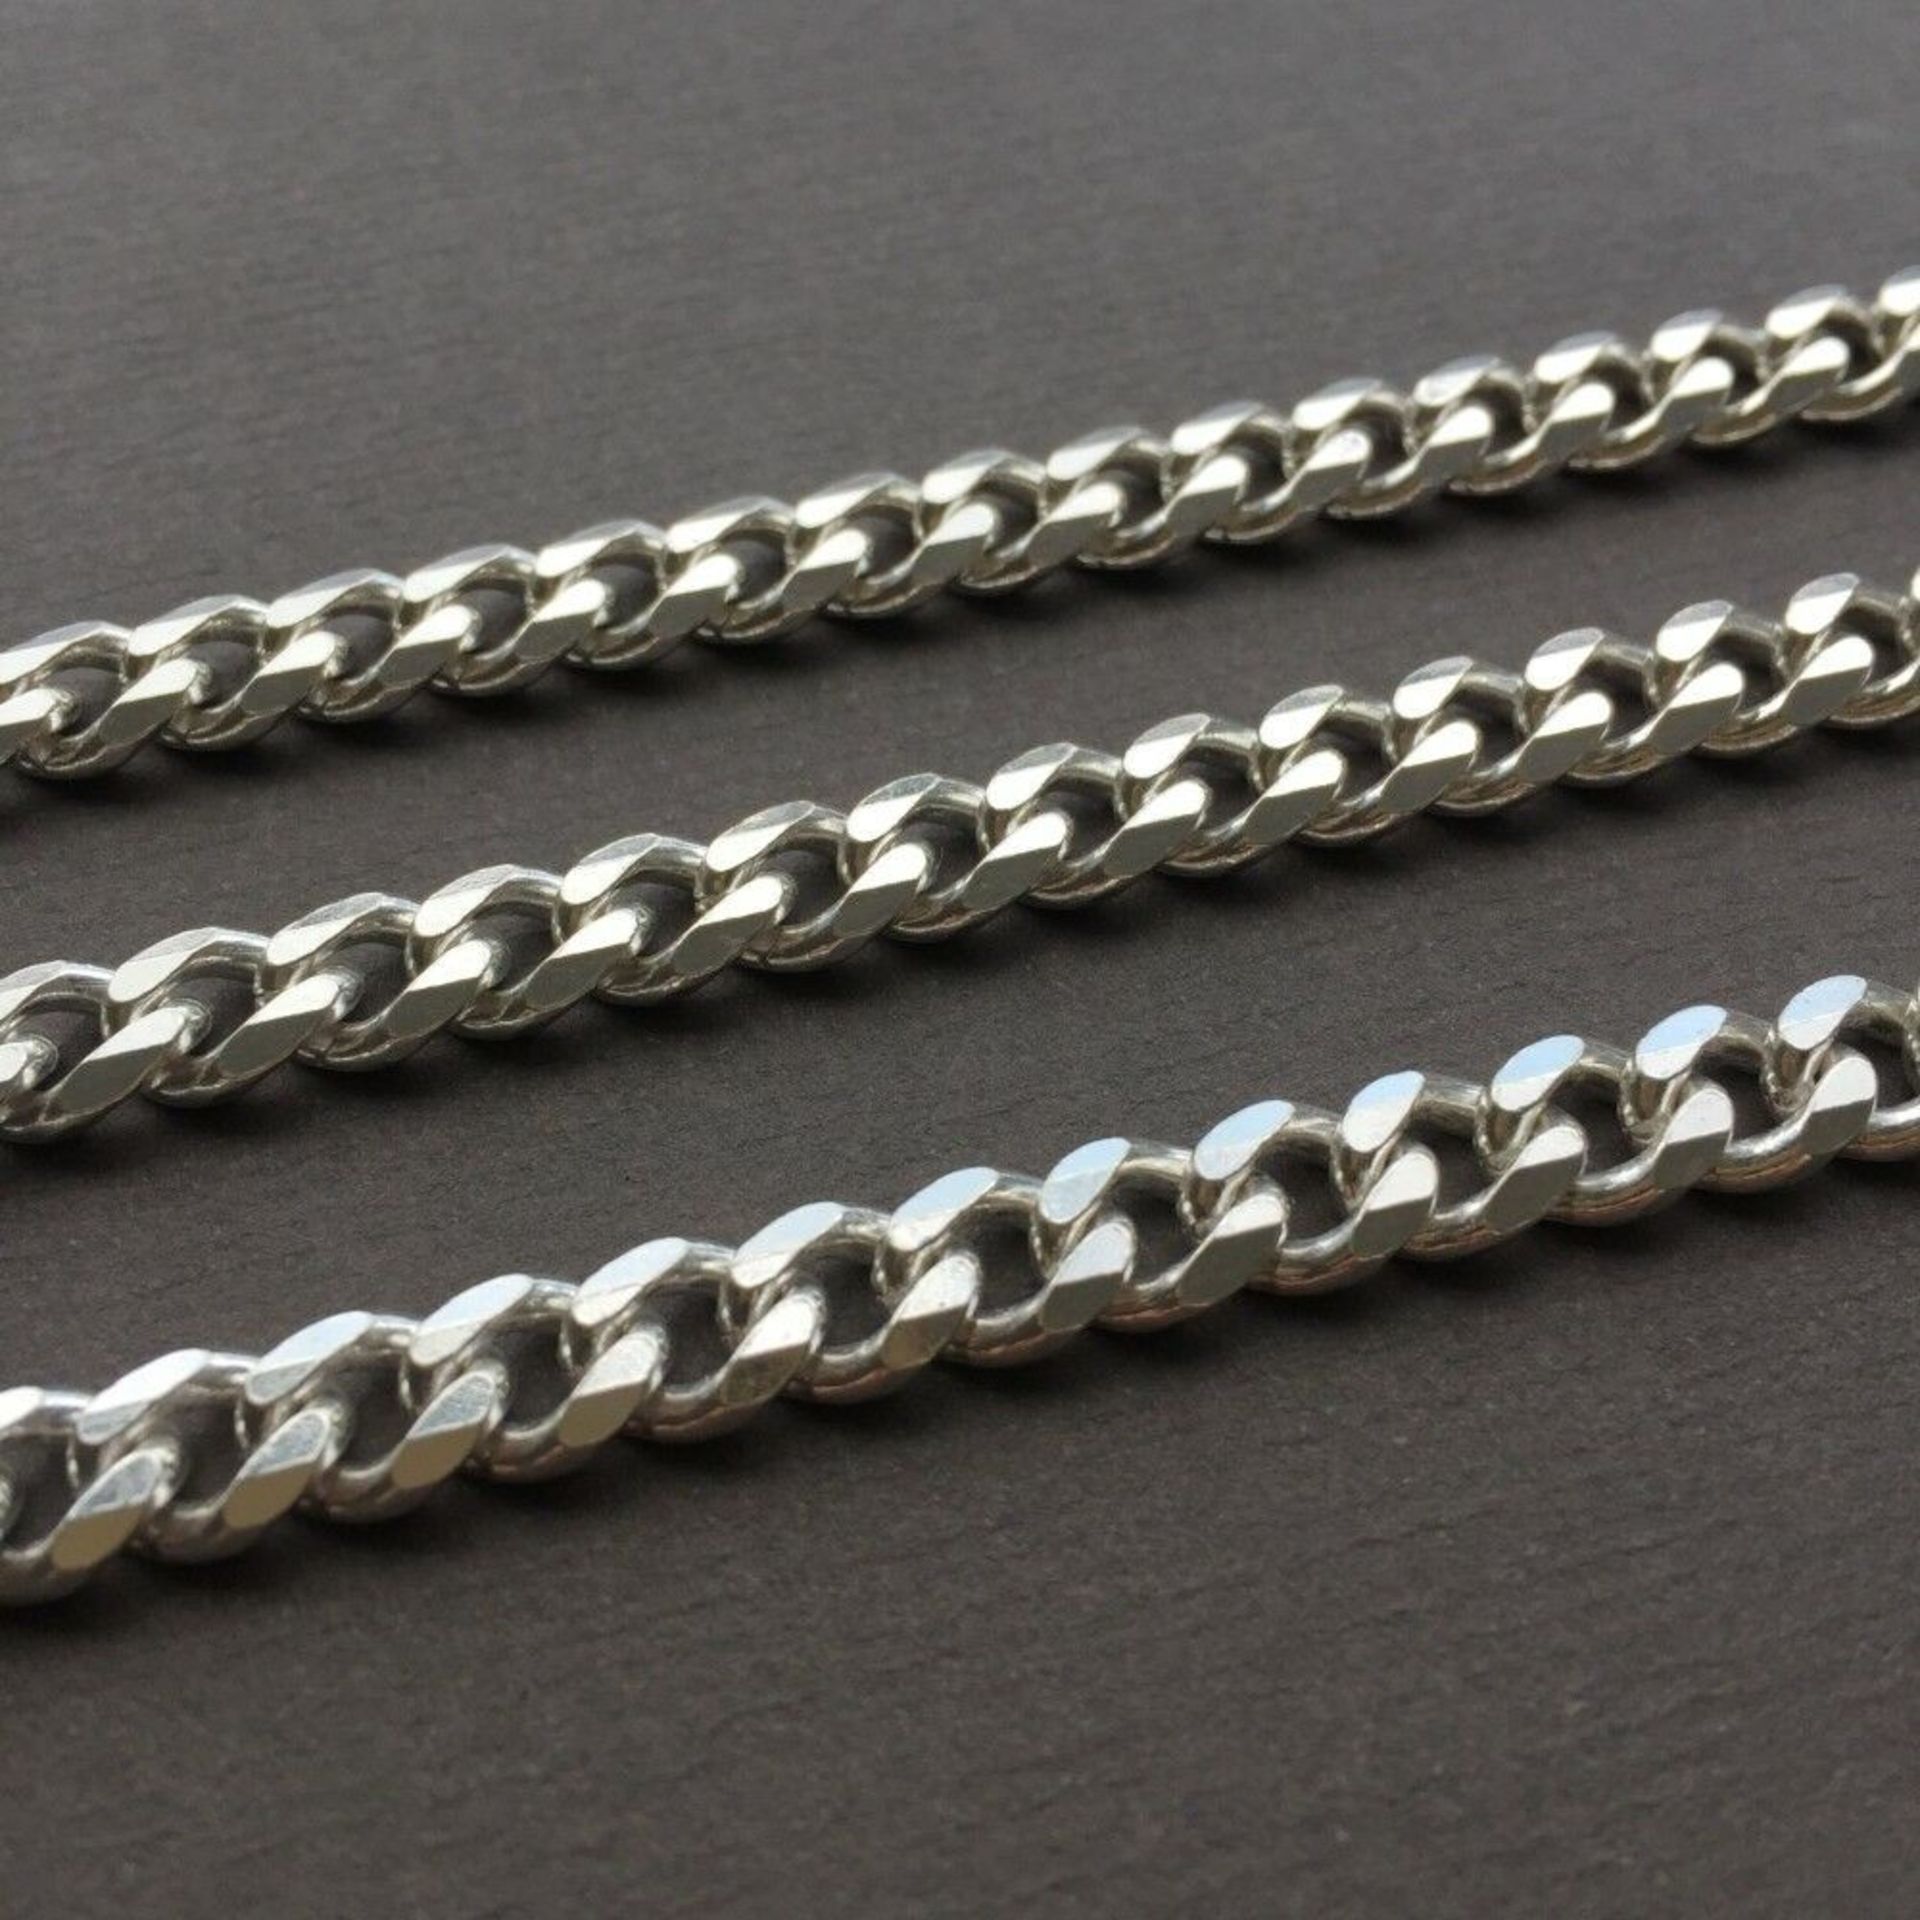 7mm Men's Curb Cuban Link Chain Necklace Pendant 925 Sterling Silver 48 GR 24 inch - 60cm - Image 2 of 7